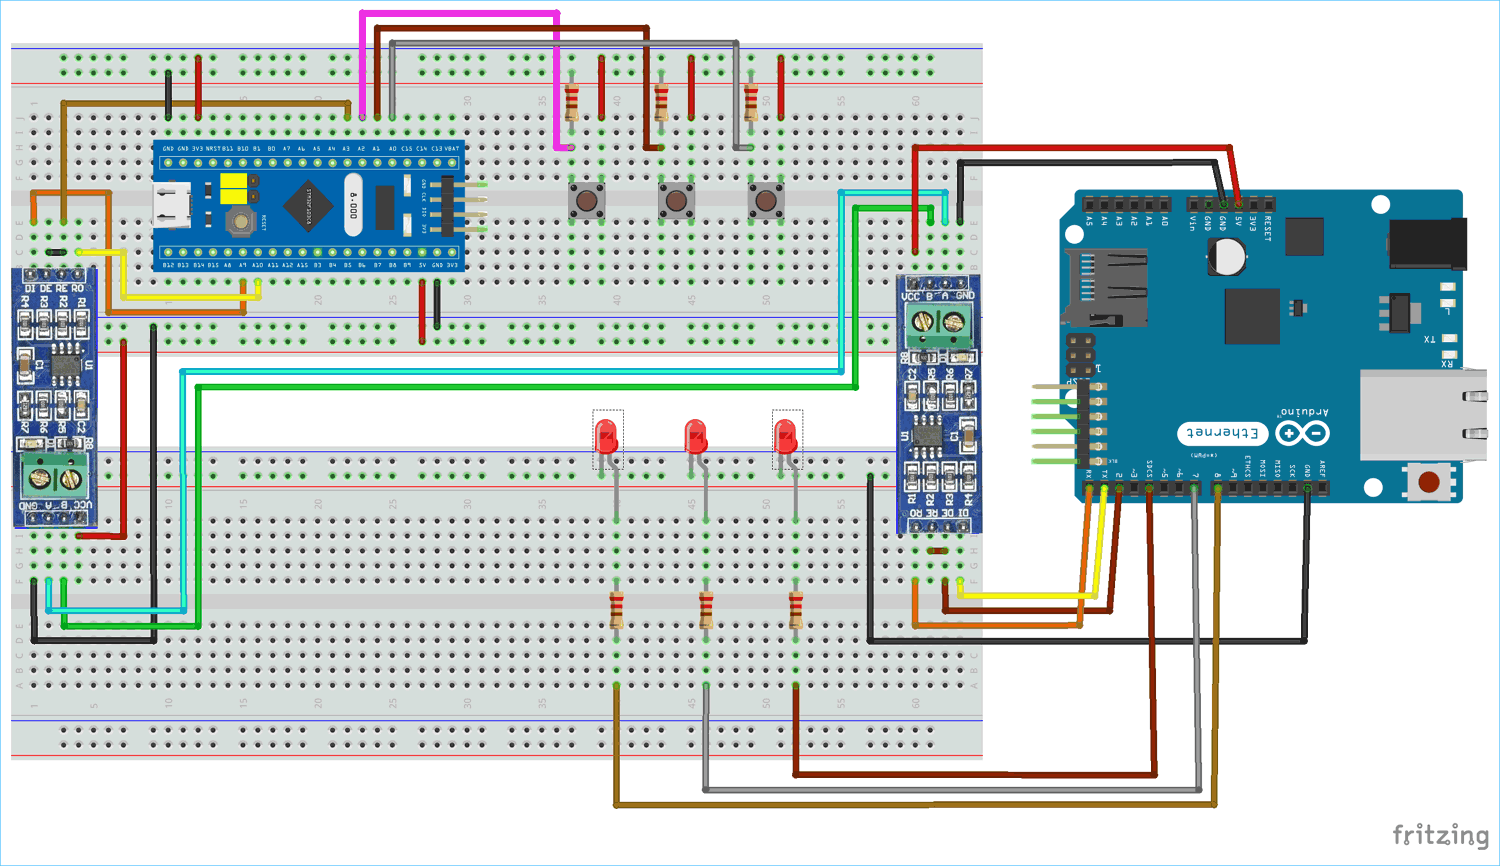 STM32F103C8 and Arduino UNO Serial Communication Circuit Diagram using RS-485